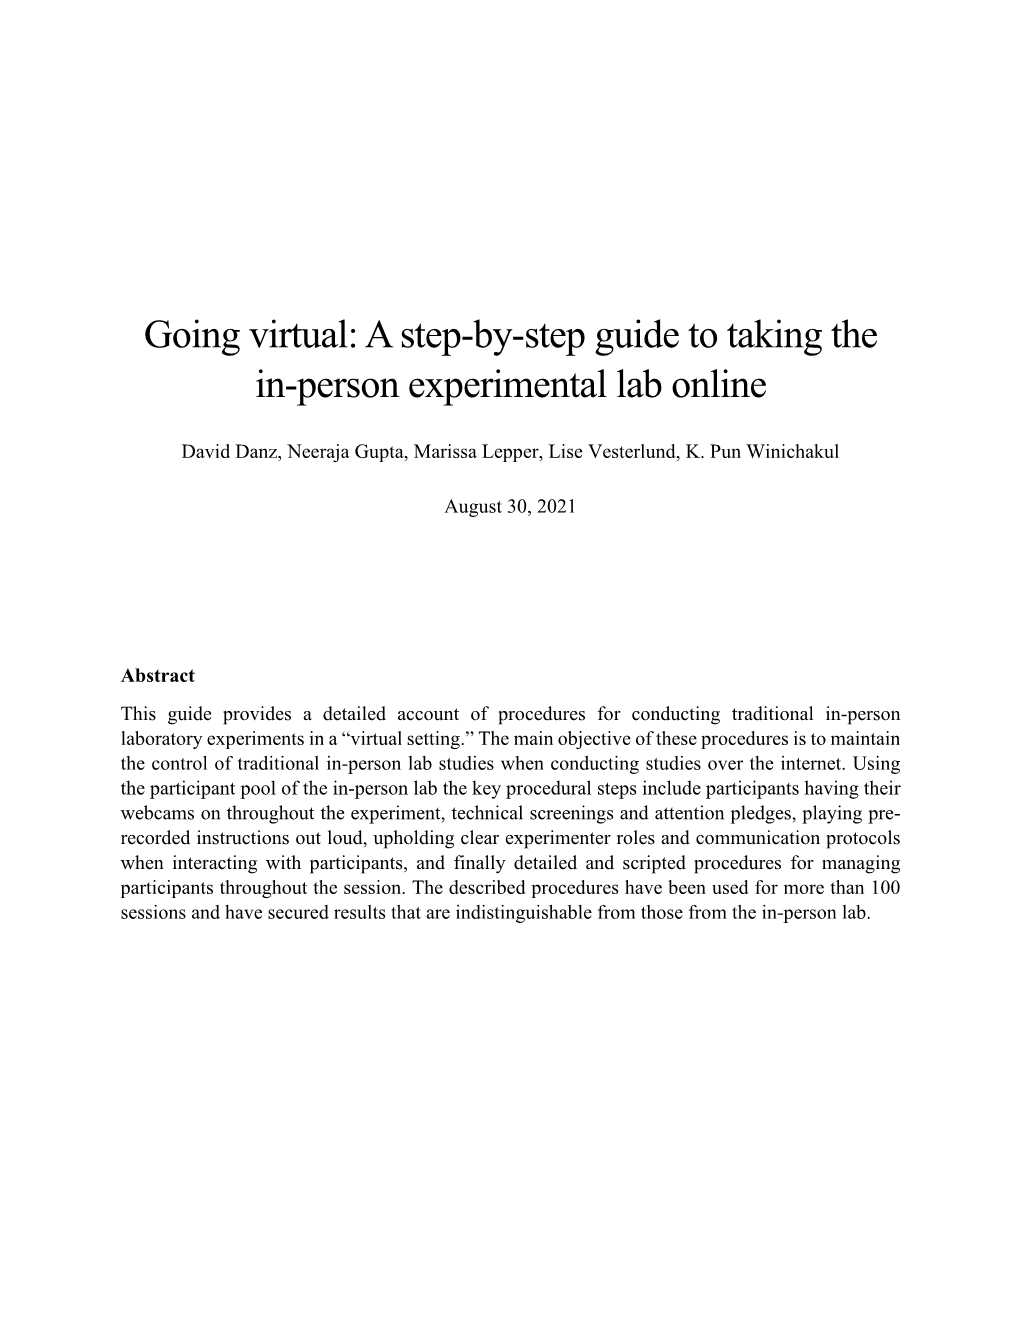 Going Virtual: a Step-By-Step Guide to Taking the In-Person Experimental Lab Online